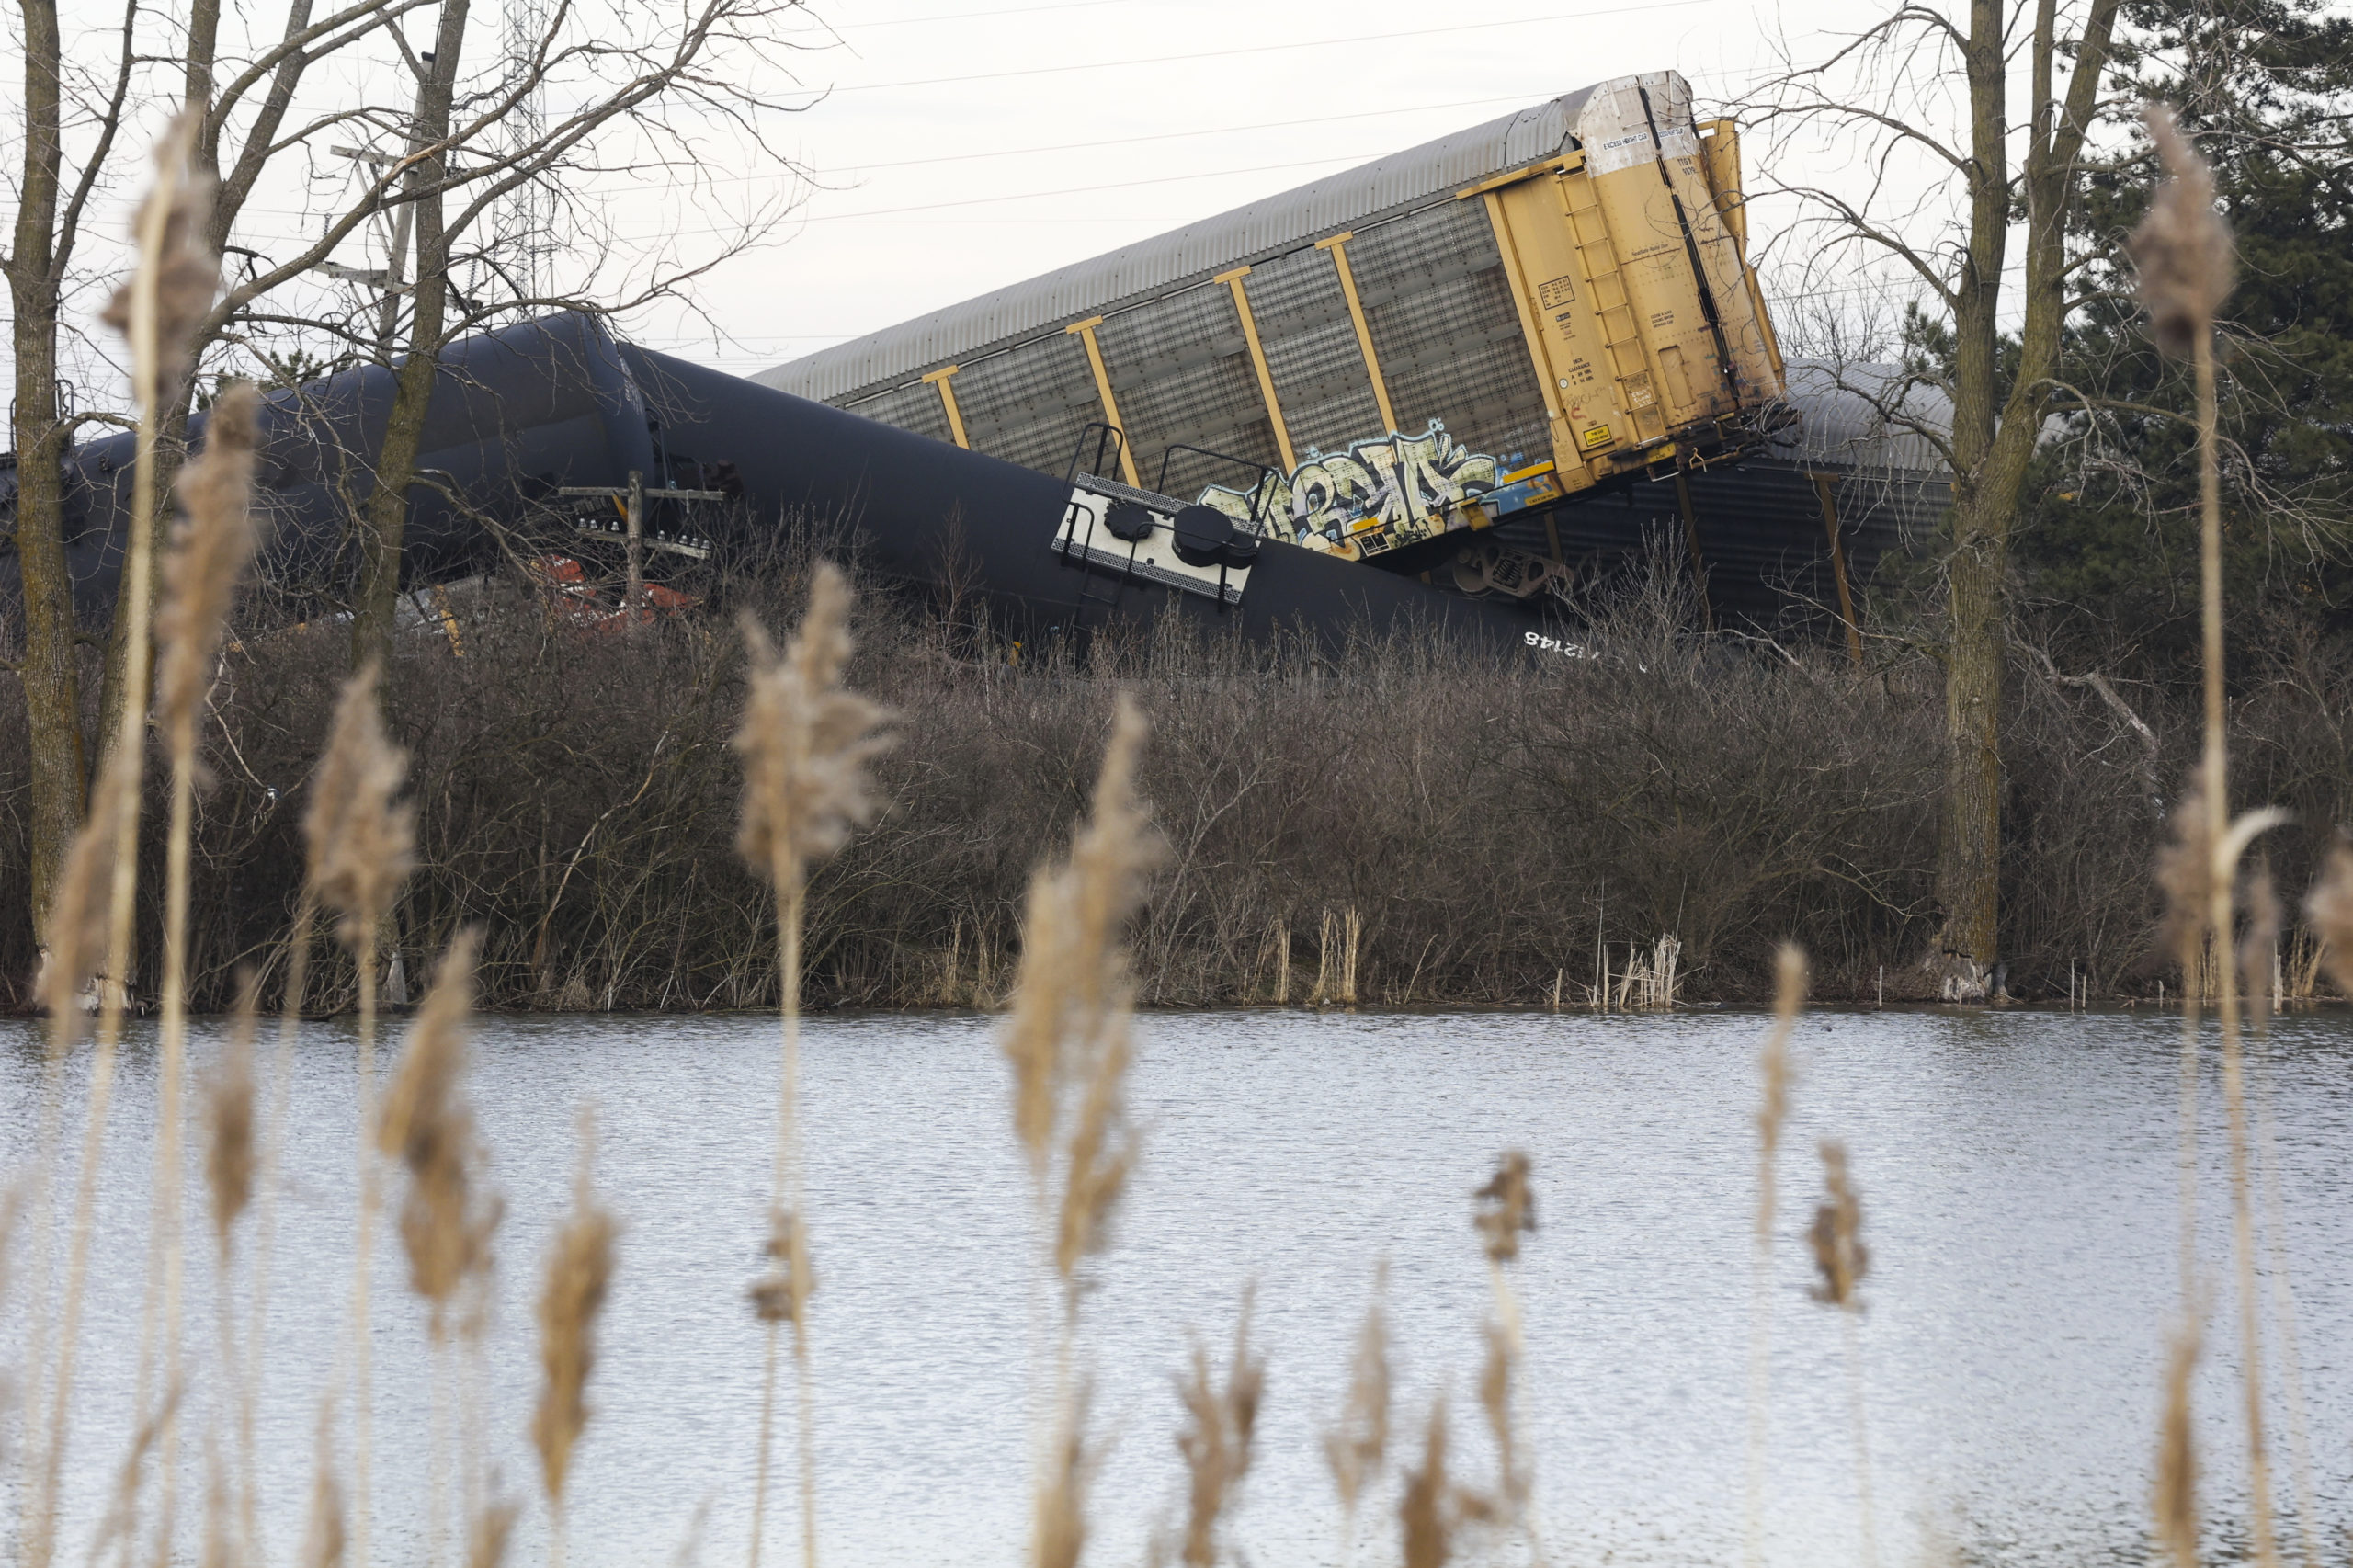 Multiple cars of a Norfolk Southern cargo train lie toppled on one another after derailing at a tra...